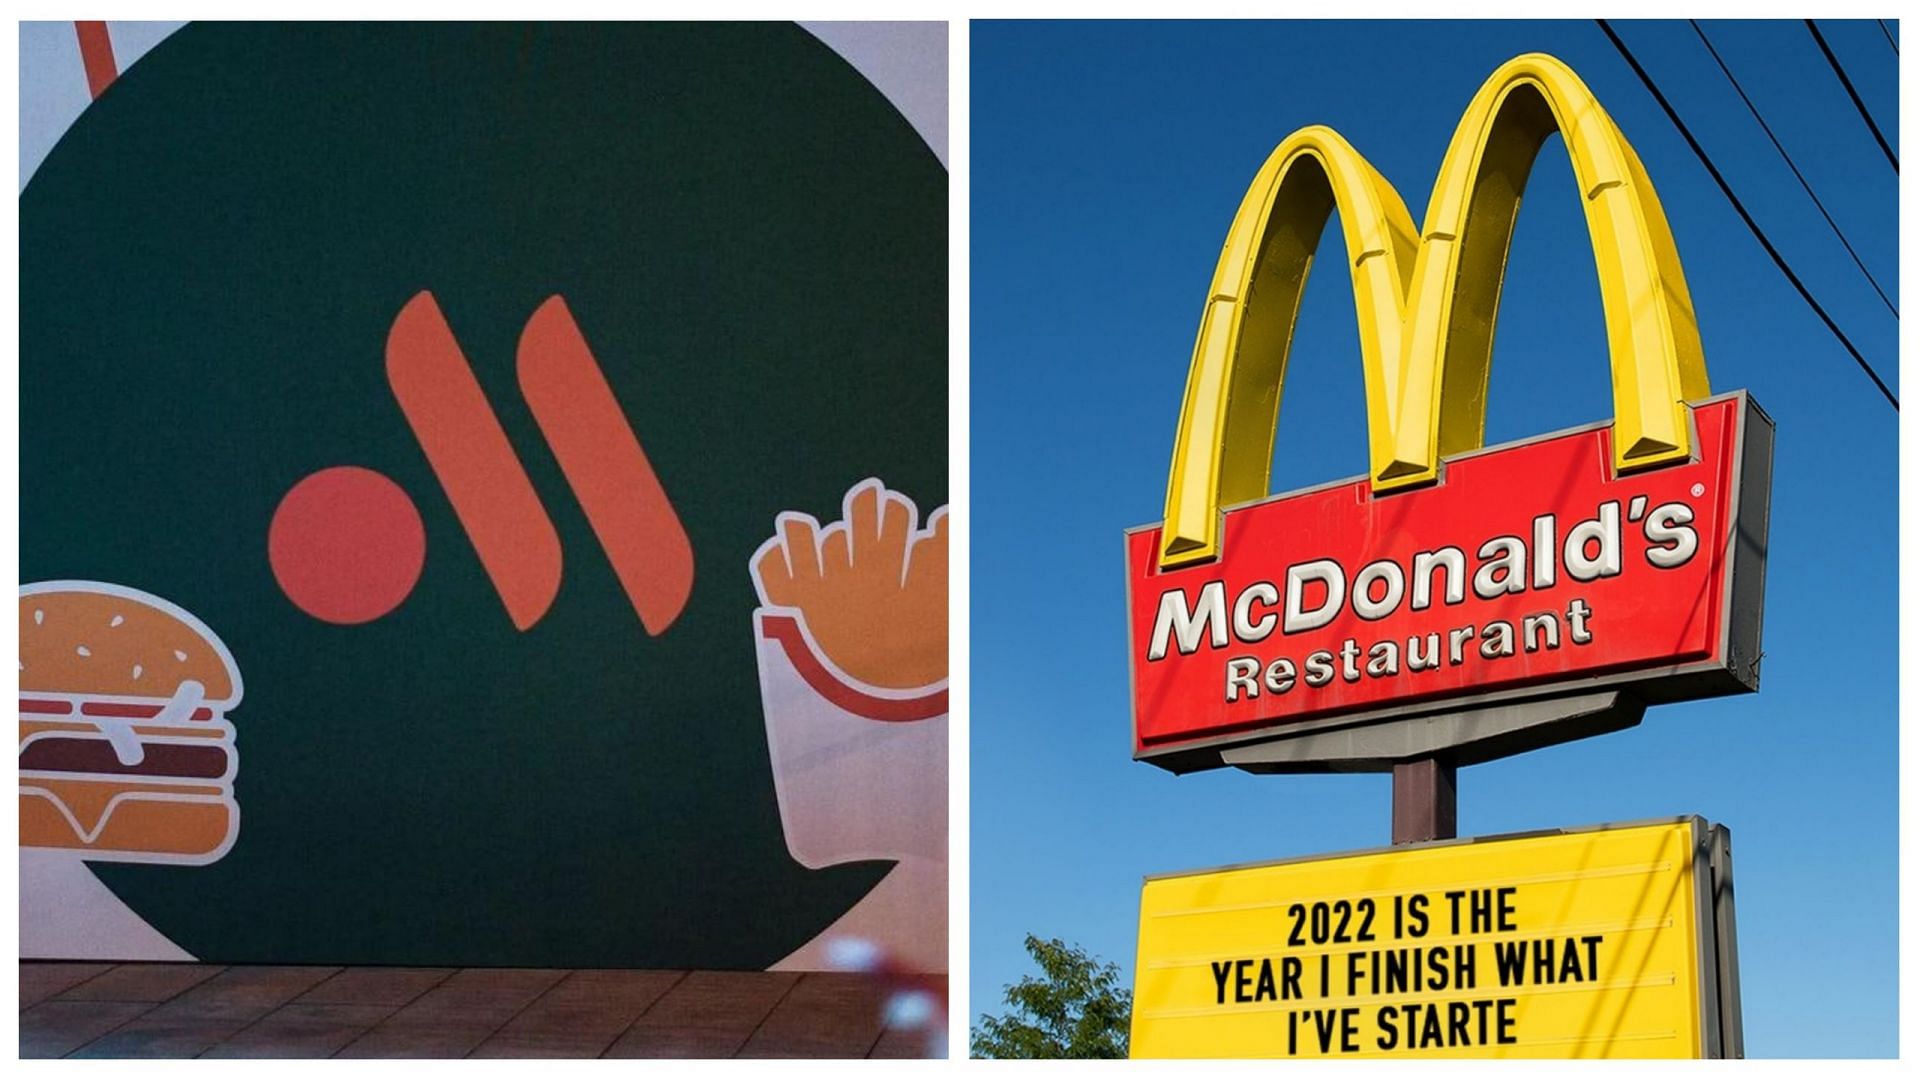 Russian fast-food company &quot;Vkusno-i tochka&quot; is set to replace McDonald&#039;s in the country (Image via @p_veronika/Twitter and @mcdonalds/Instagram)